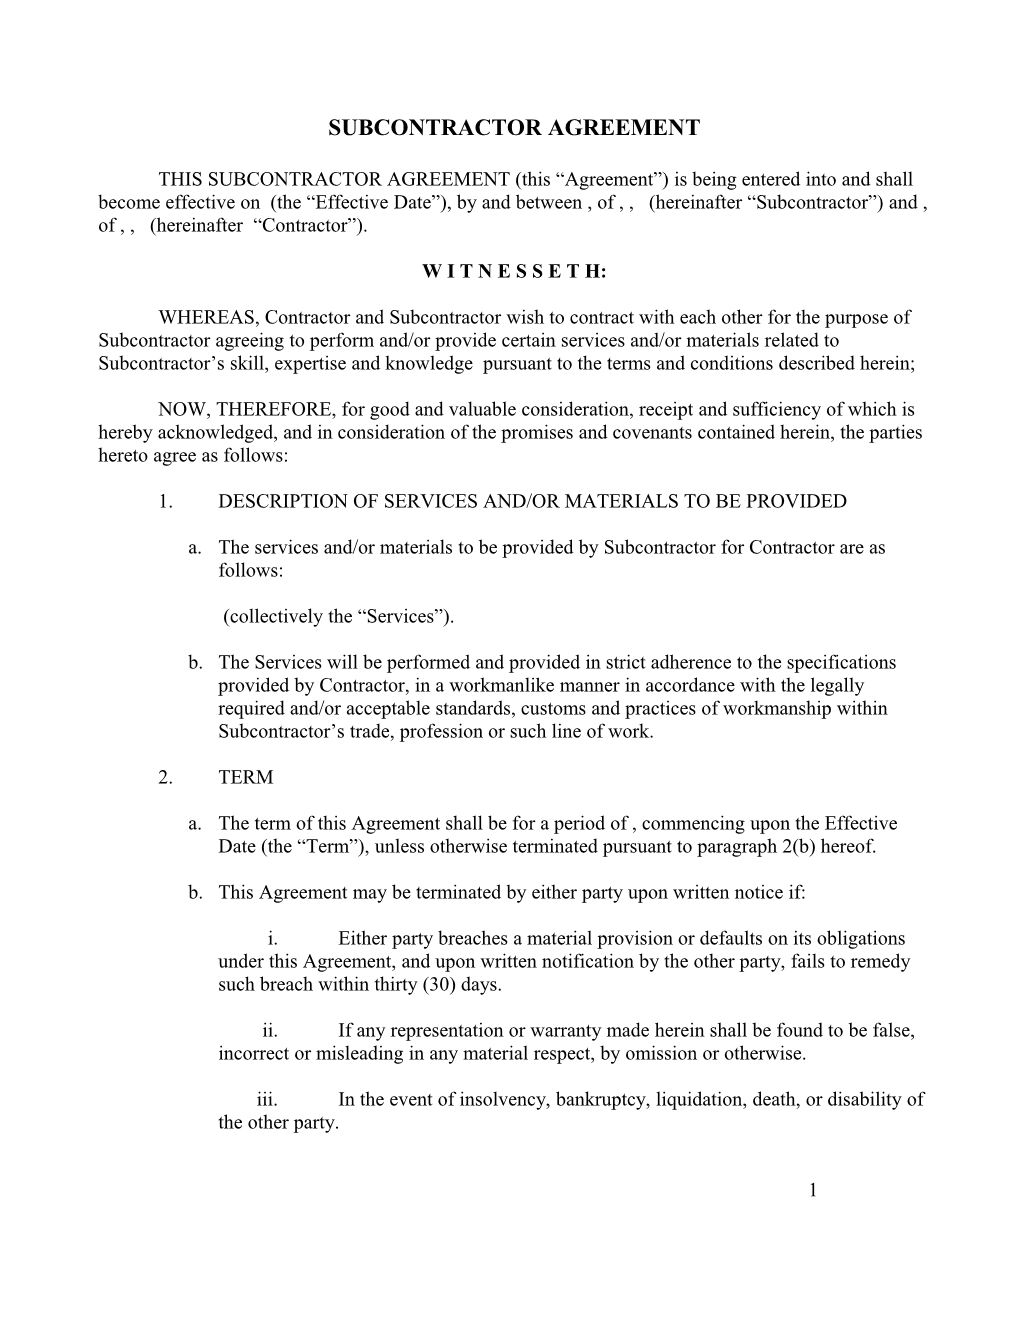 Subcontractor Agreement - Template